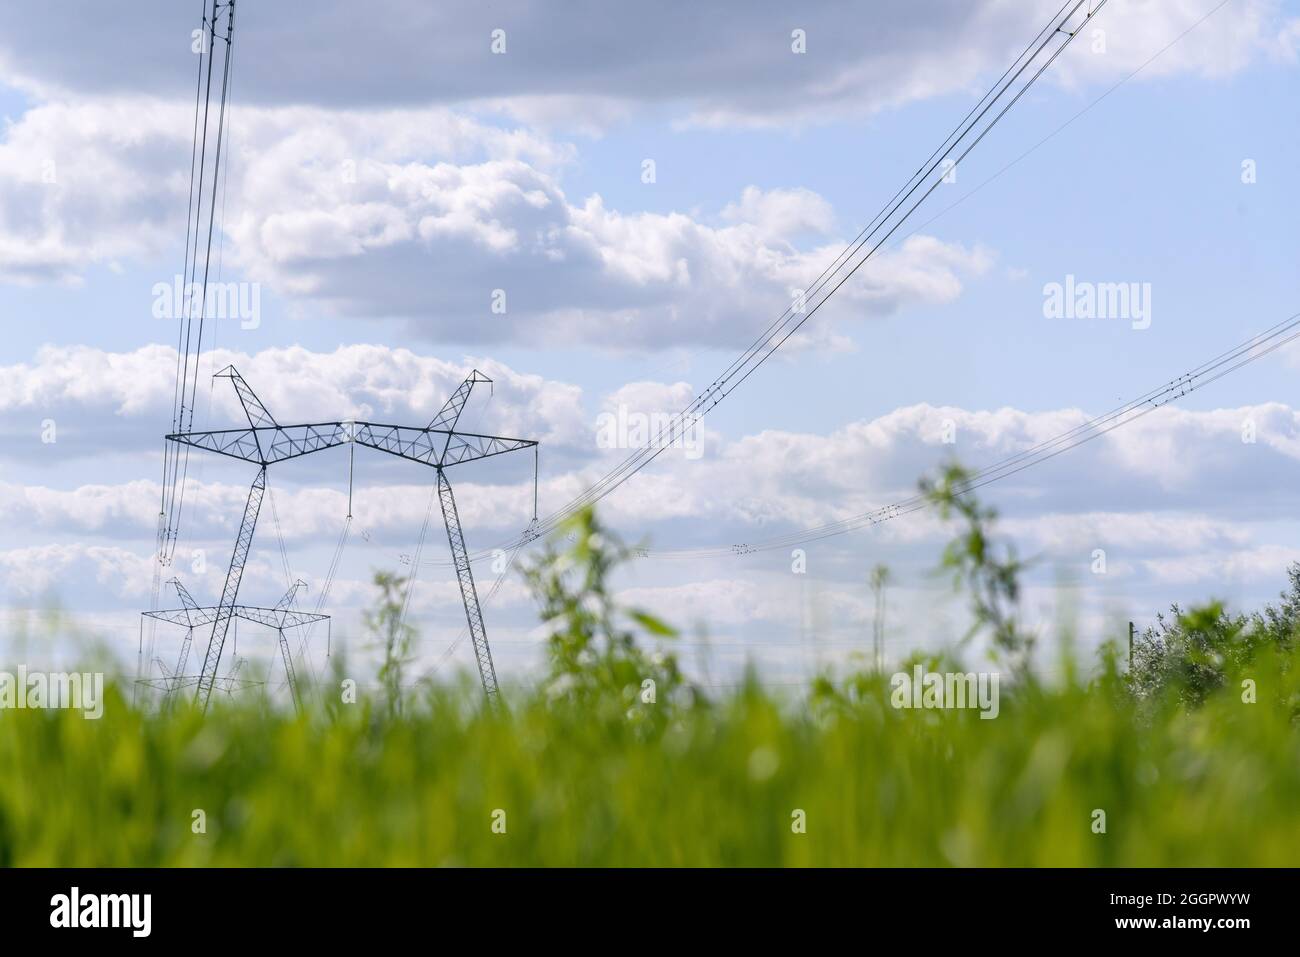 A view of power lines, electric power transmissions in a field and tall grasses in western Ukraine.Prime Minister of Ukraine, Denis Shmygal announced that from October 1st, the cost of electricity for 80% of the population will decrease following the Cabinet of Ministers passing a resolution which reduced the electricity tariff to UAH 1.44 per kilowatt/hour if households consume less than 250 kilowatt/hours per month. At the same time, if the household uses more than this norm, then all consumed electricity must be paid at full price - UAH 1.68 per kWh. (Photo by Mykola Tys/SOPA Images/Sipa Stock Photo